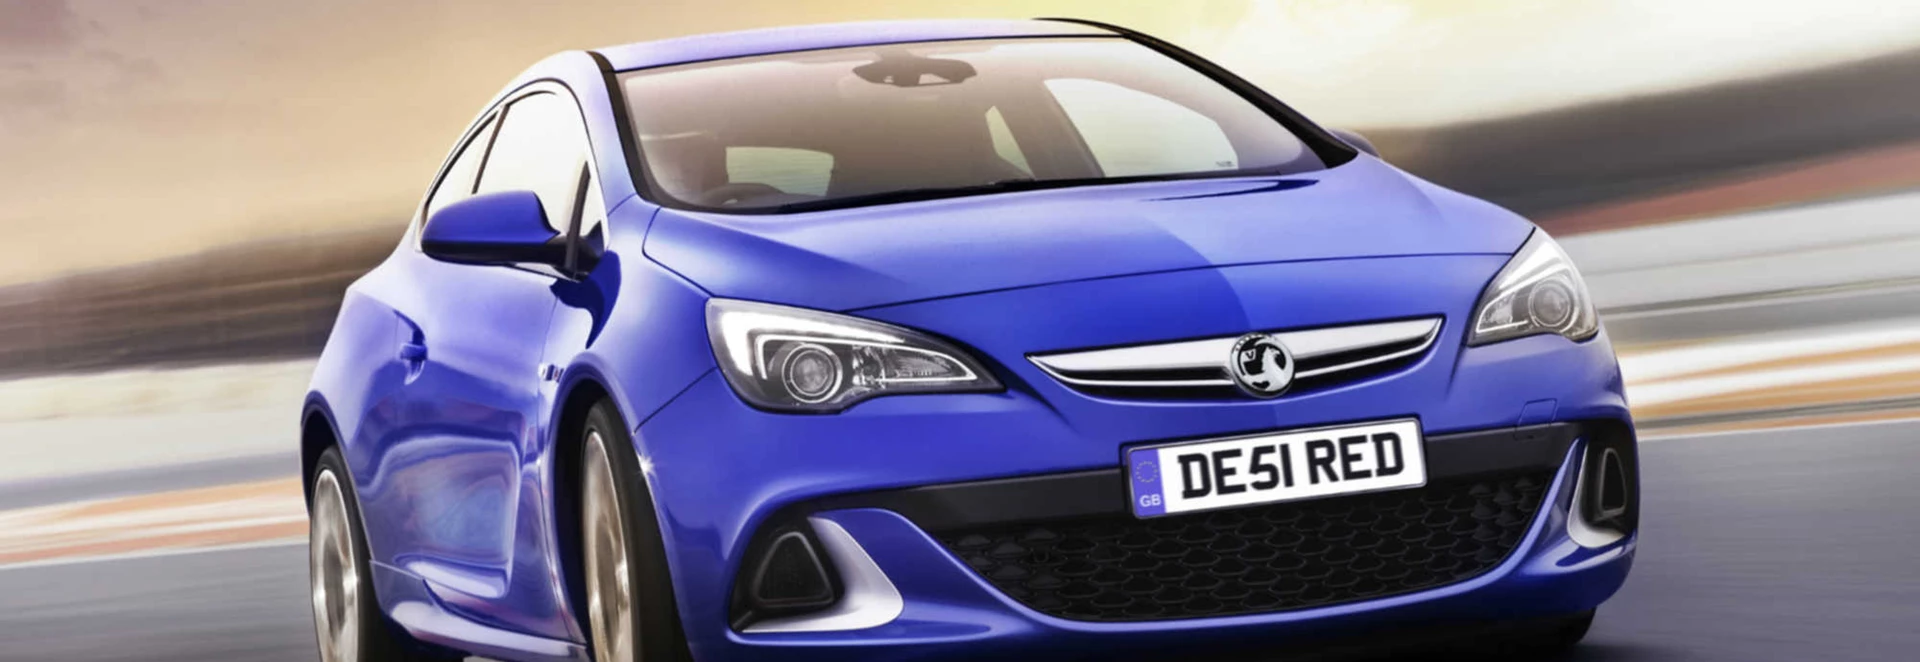 Vauxhall Astra VXR coupe review 